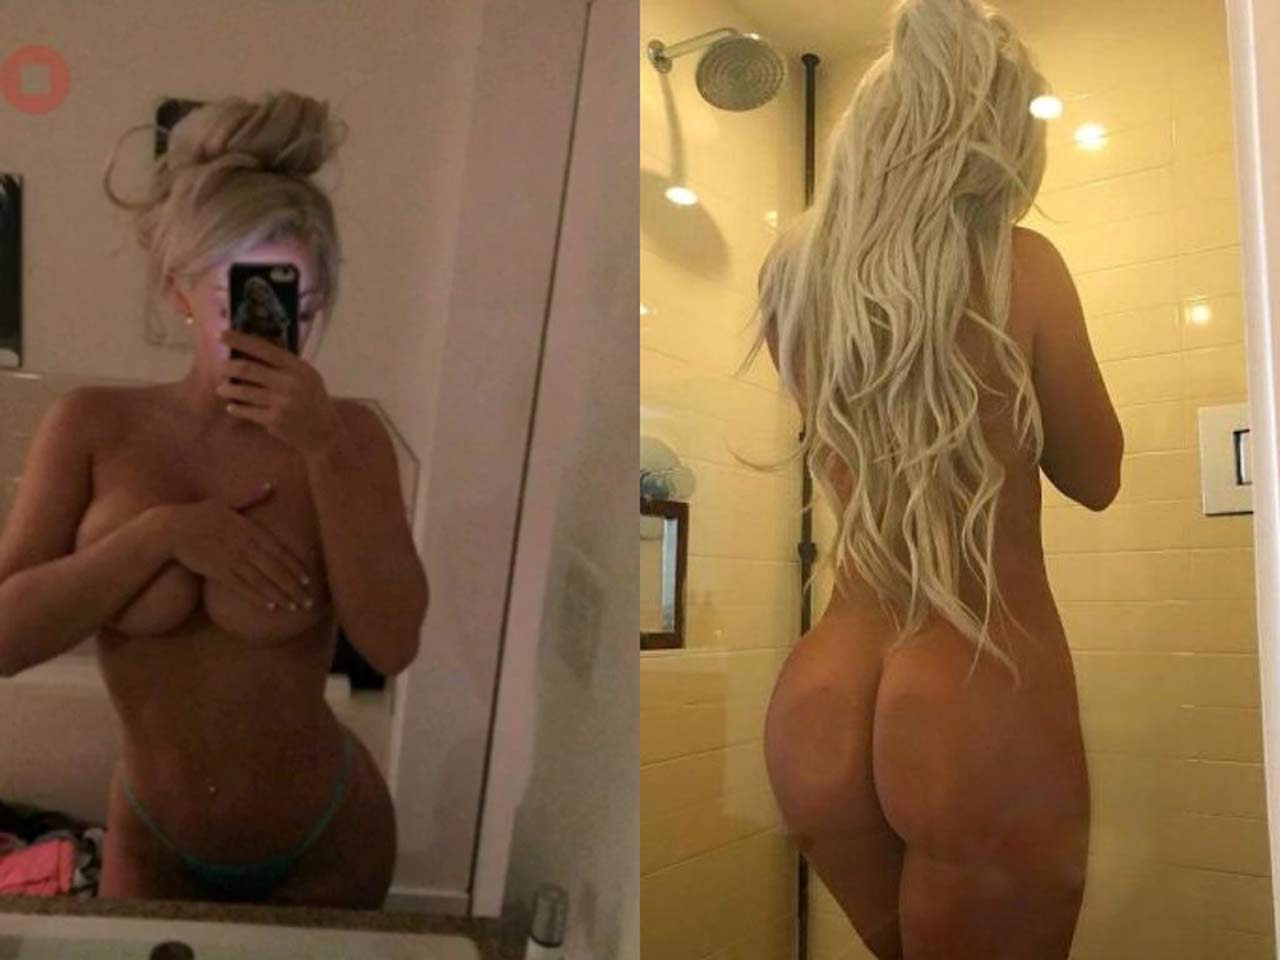 denzel nash reccomend laci kay somers pussy pic